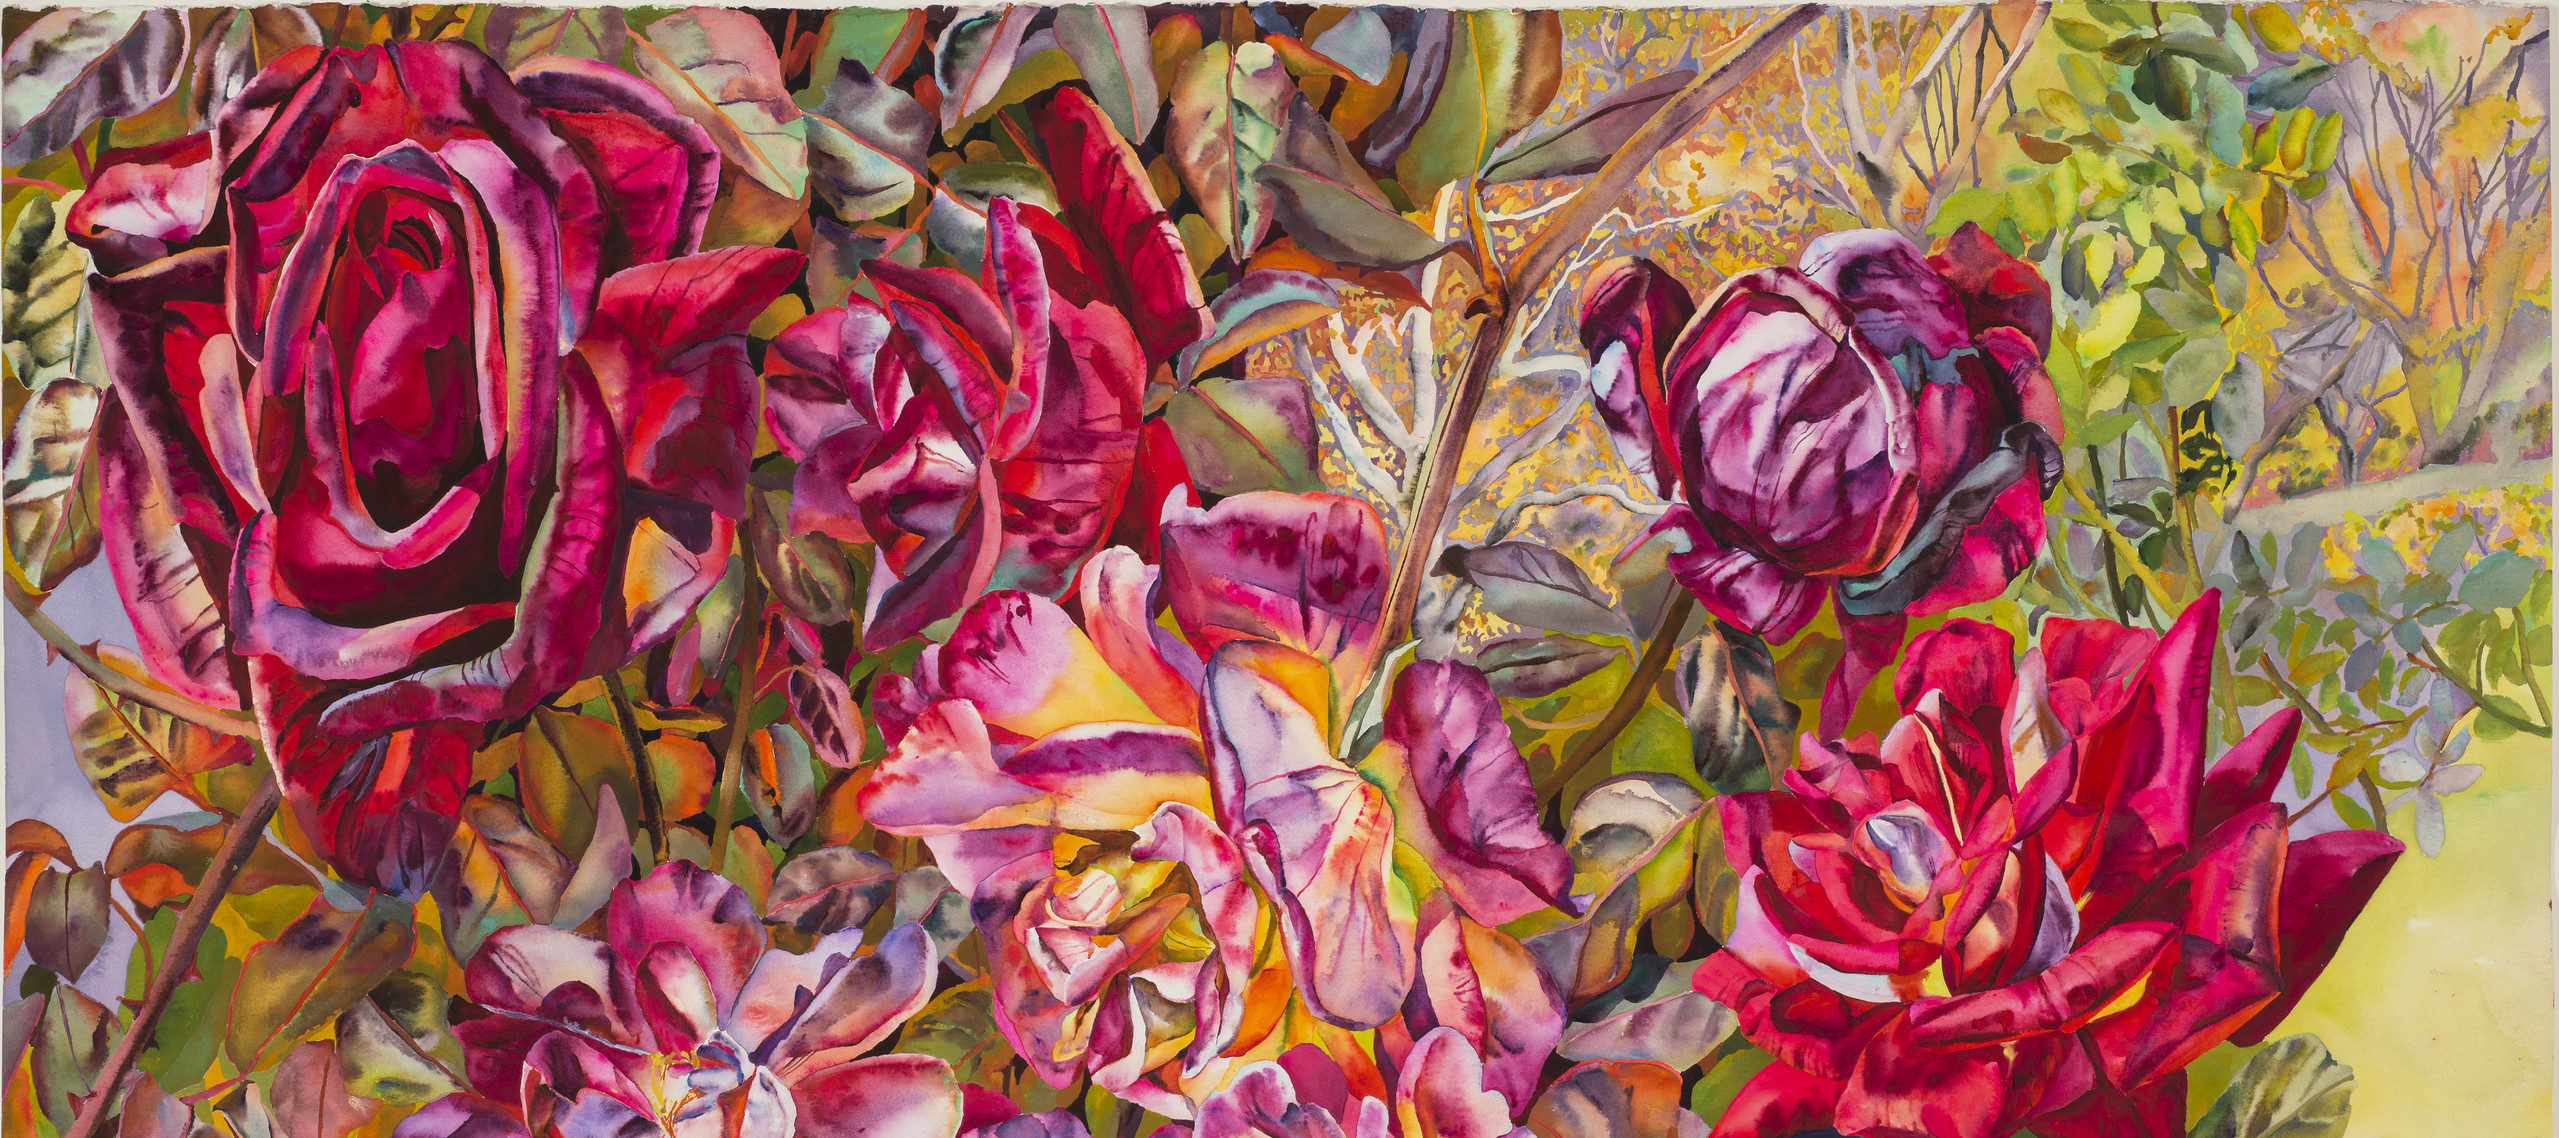 Long and thin horizontal crop of a larger artwork features a closeup detail of watercolor roses in vibrant bloom in shades of hot pink, violet, and yellow with thick leaves surrounding.